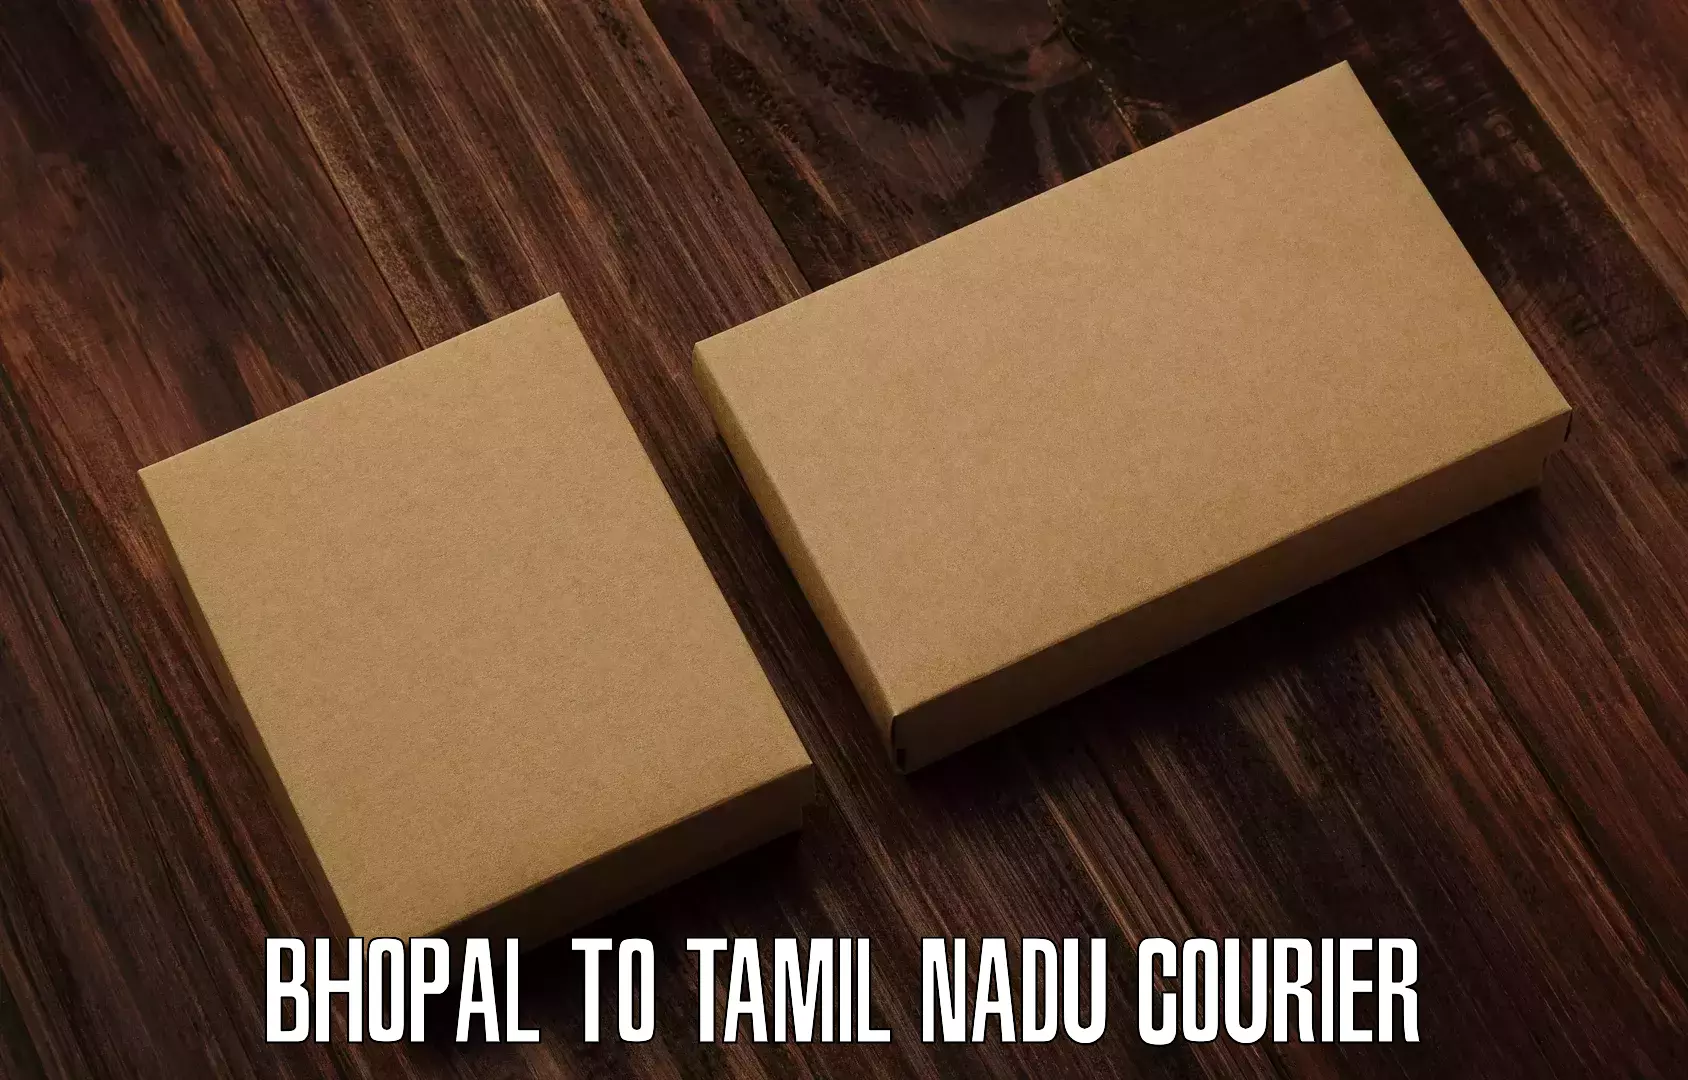 Nationwide courier service Bhopal to Ennore Port Chennai